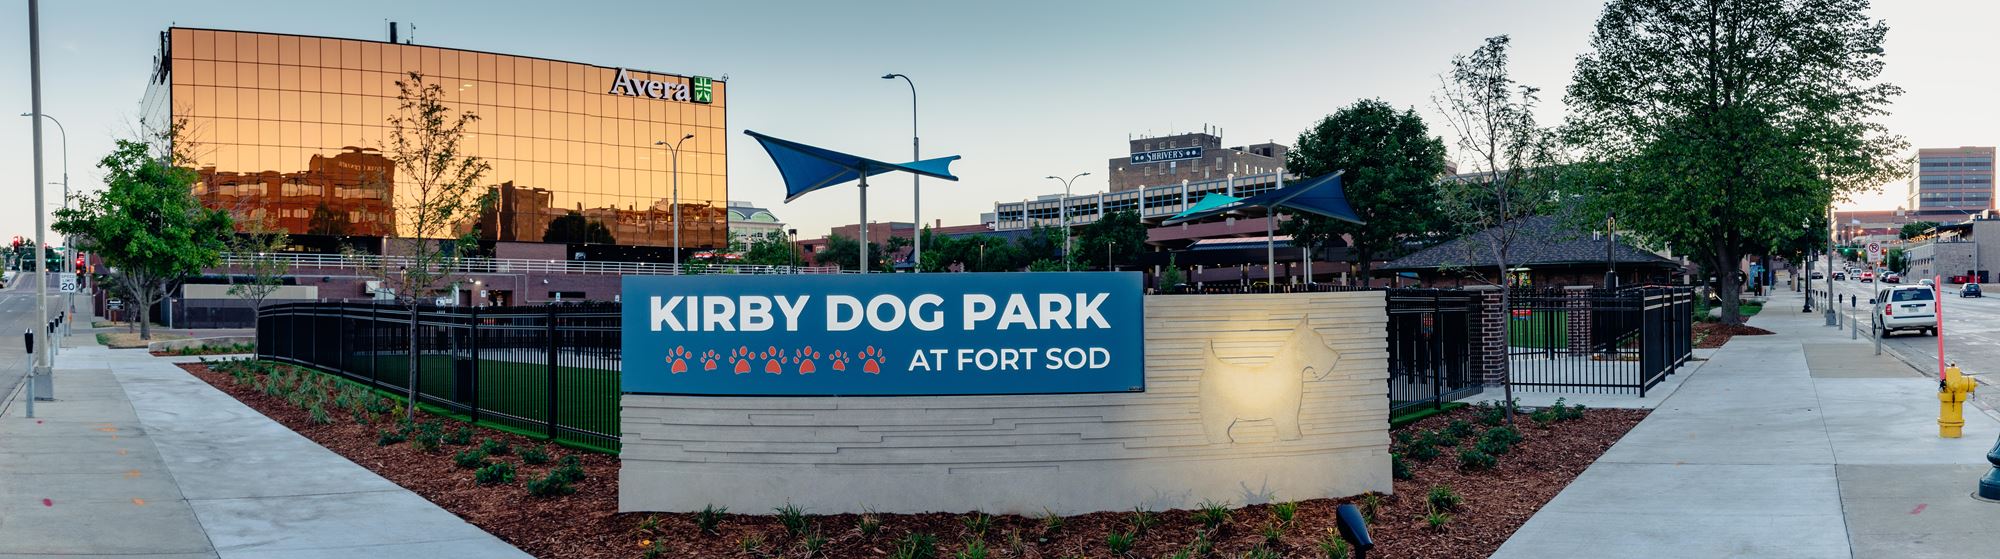 Kirby Dog Park Grand Opening